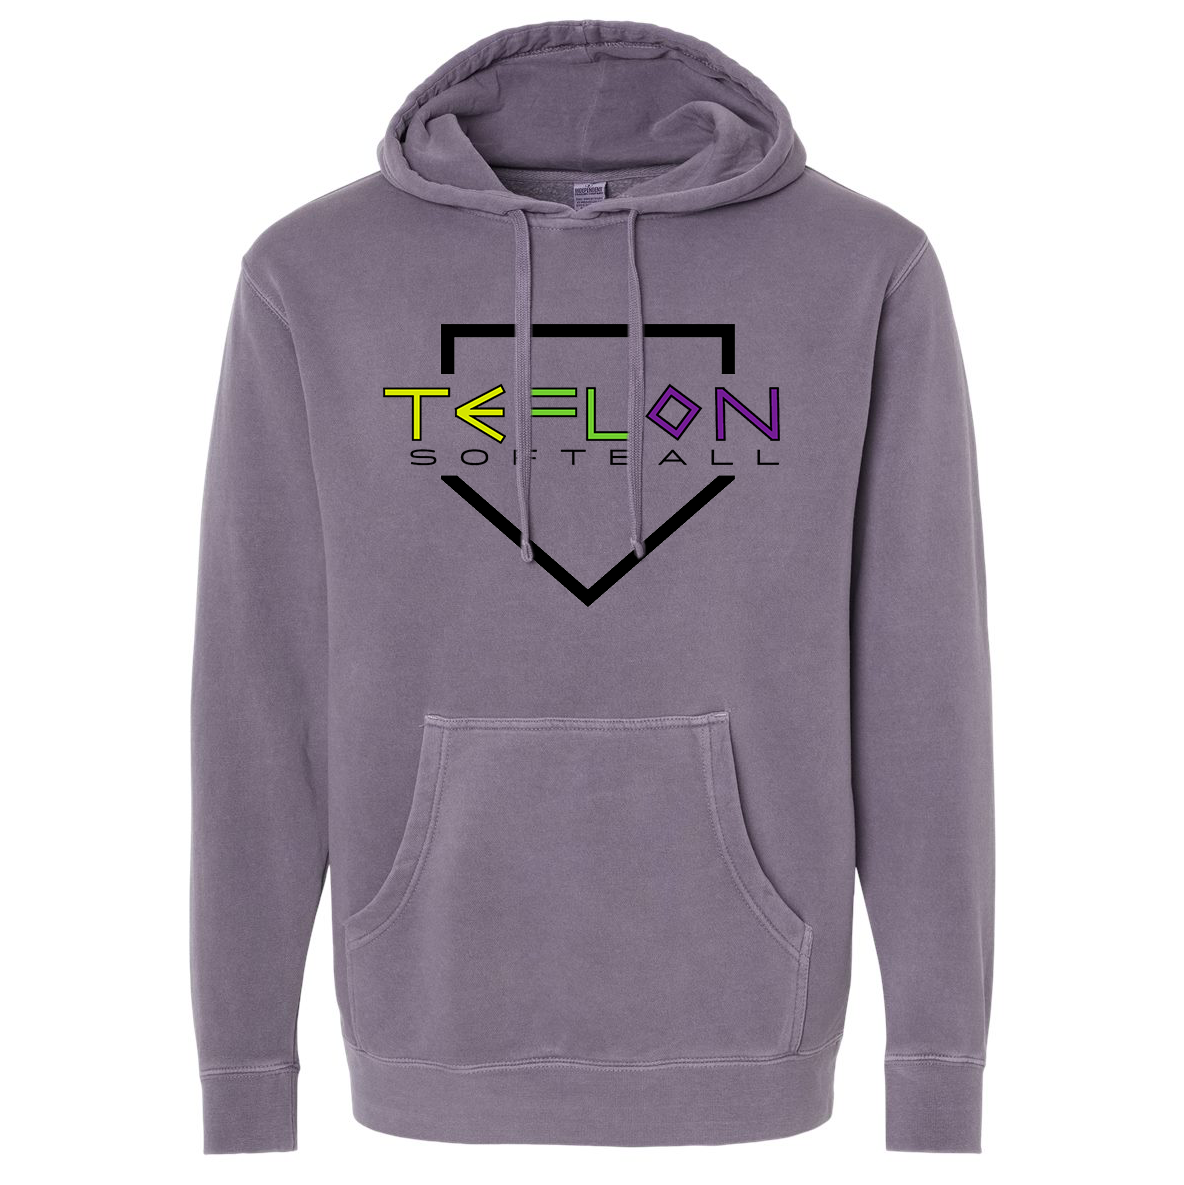 Team Teflon Softball Independent Trading Co. Pigment-Dyed Hooded Sweatshirt